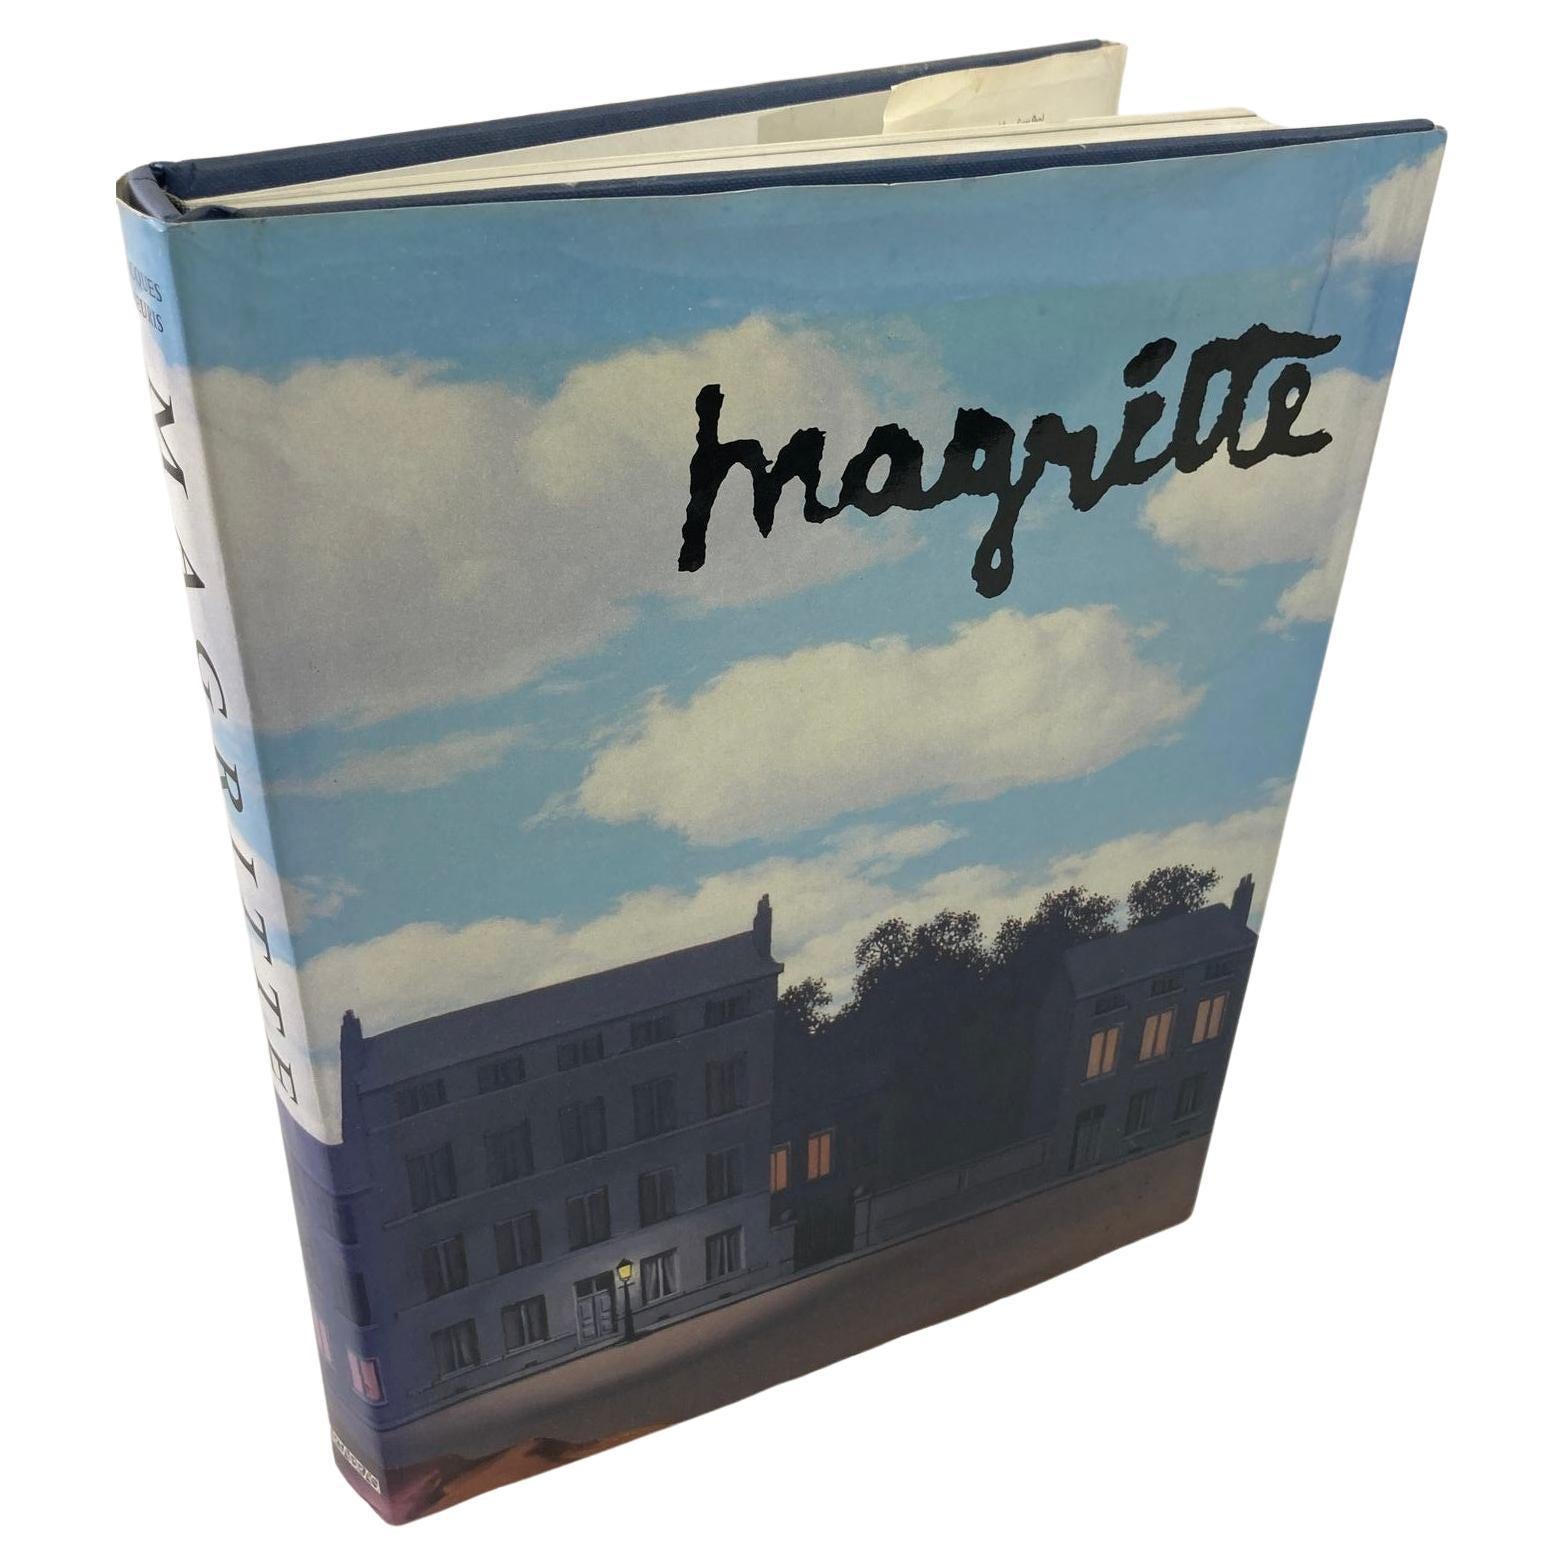 Magritte by Jacques Meuris 1988 1st Edition Hardcover Art Book